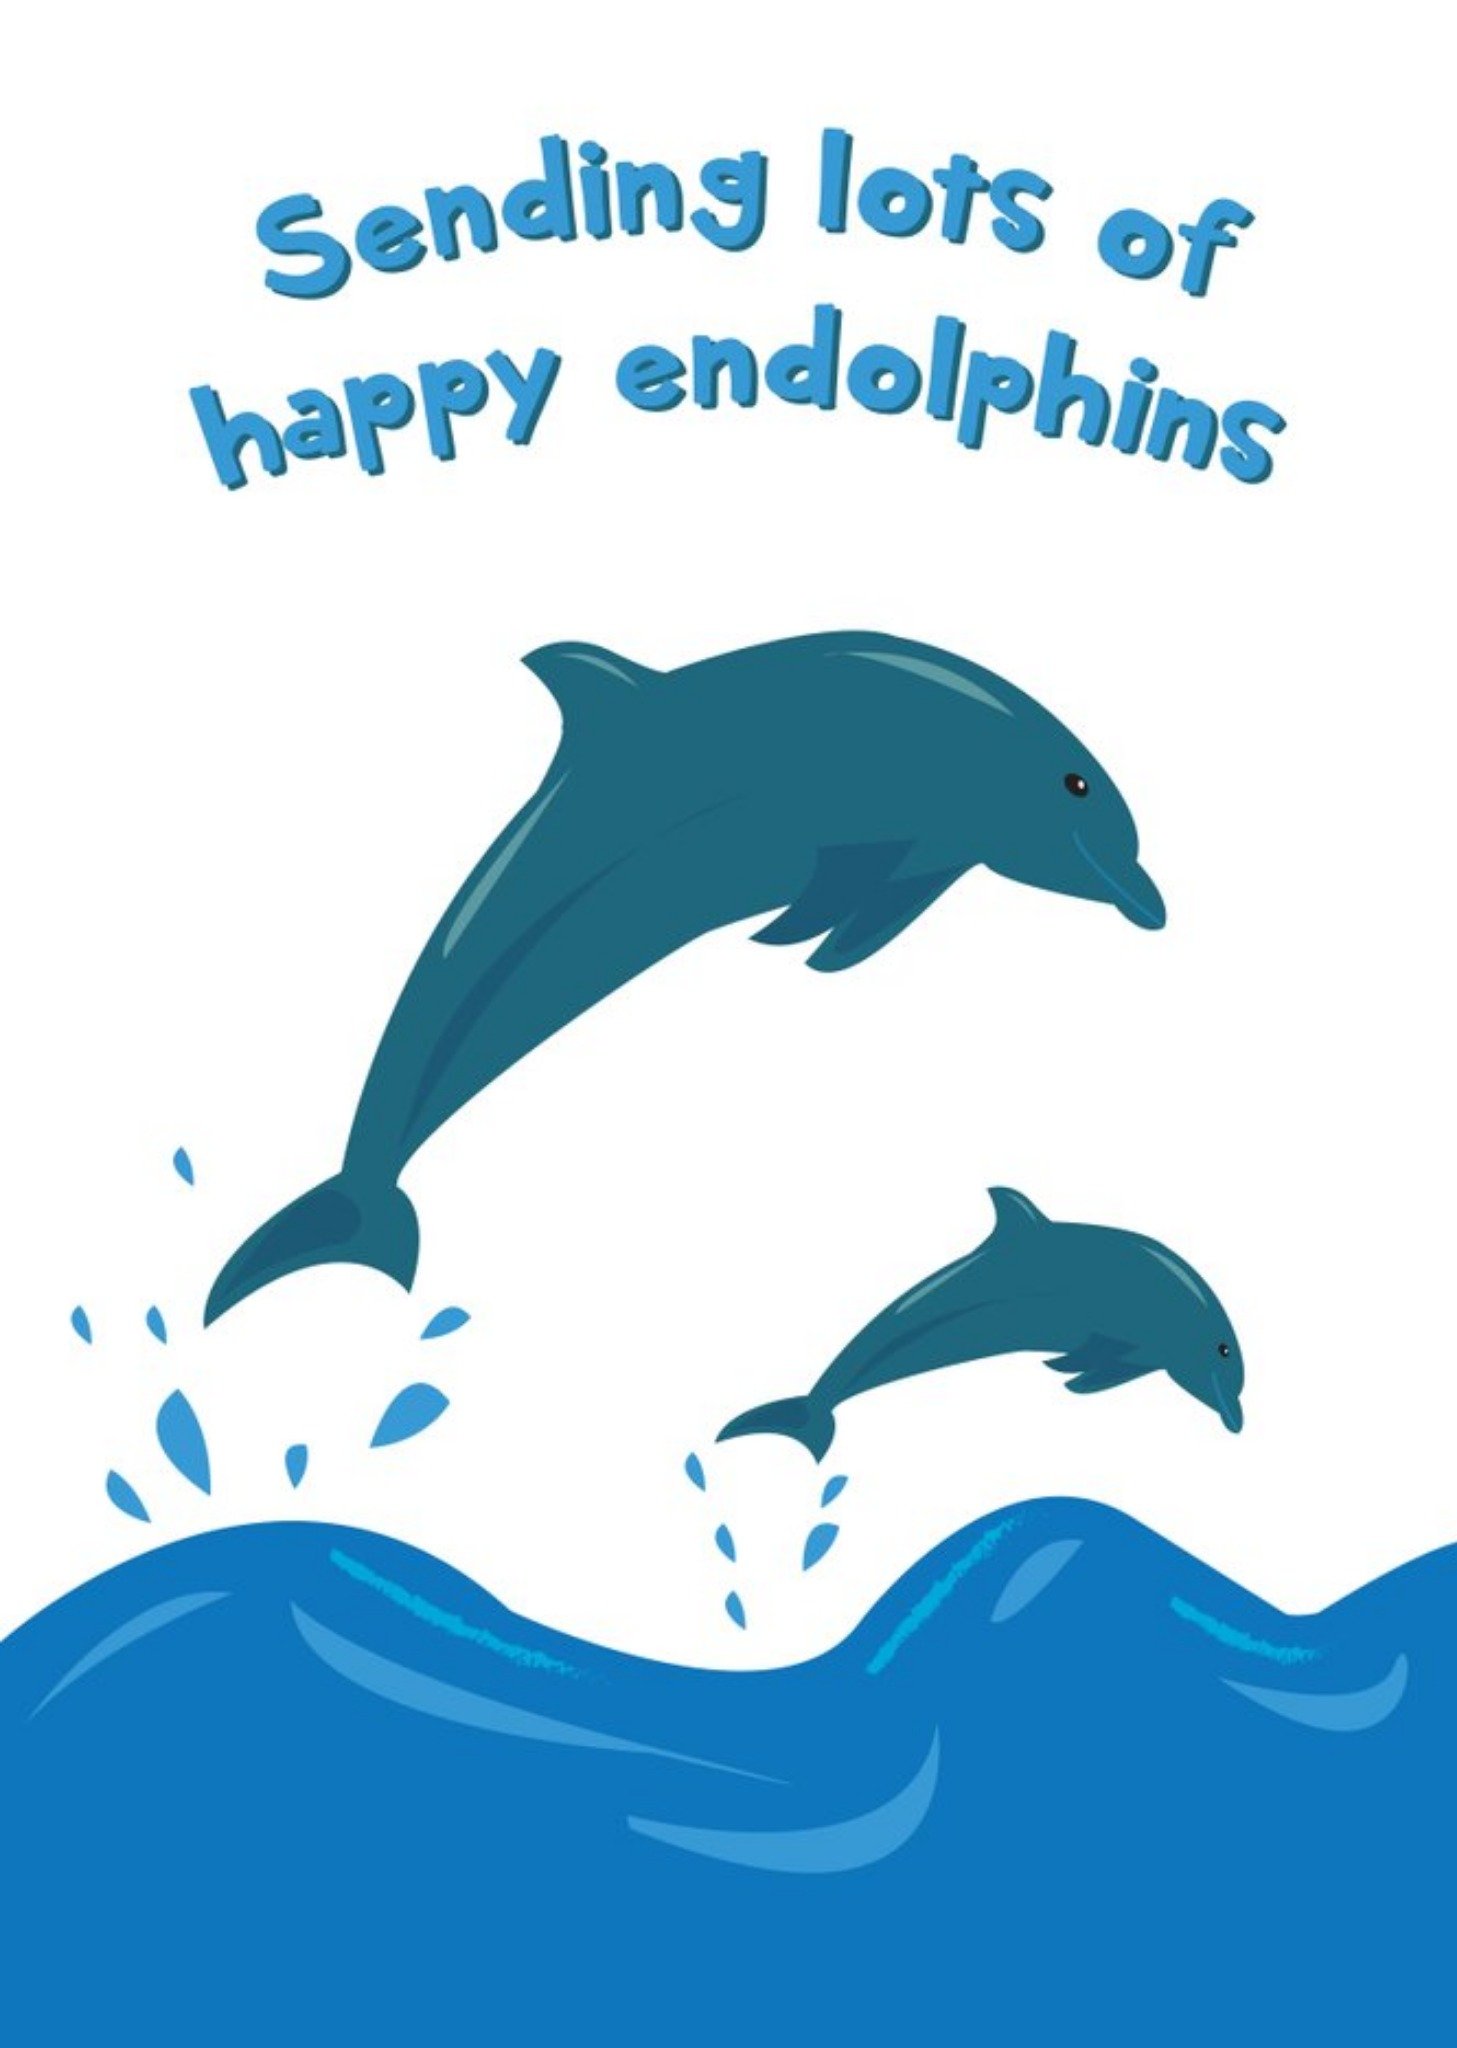 Moonpig Illustration Of Two Dolphins Sending You Lots Of Happy Endolphins Card Ecard